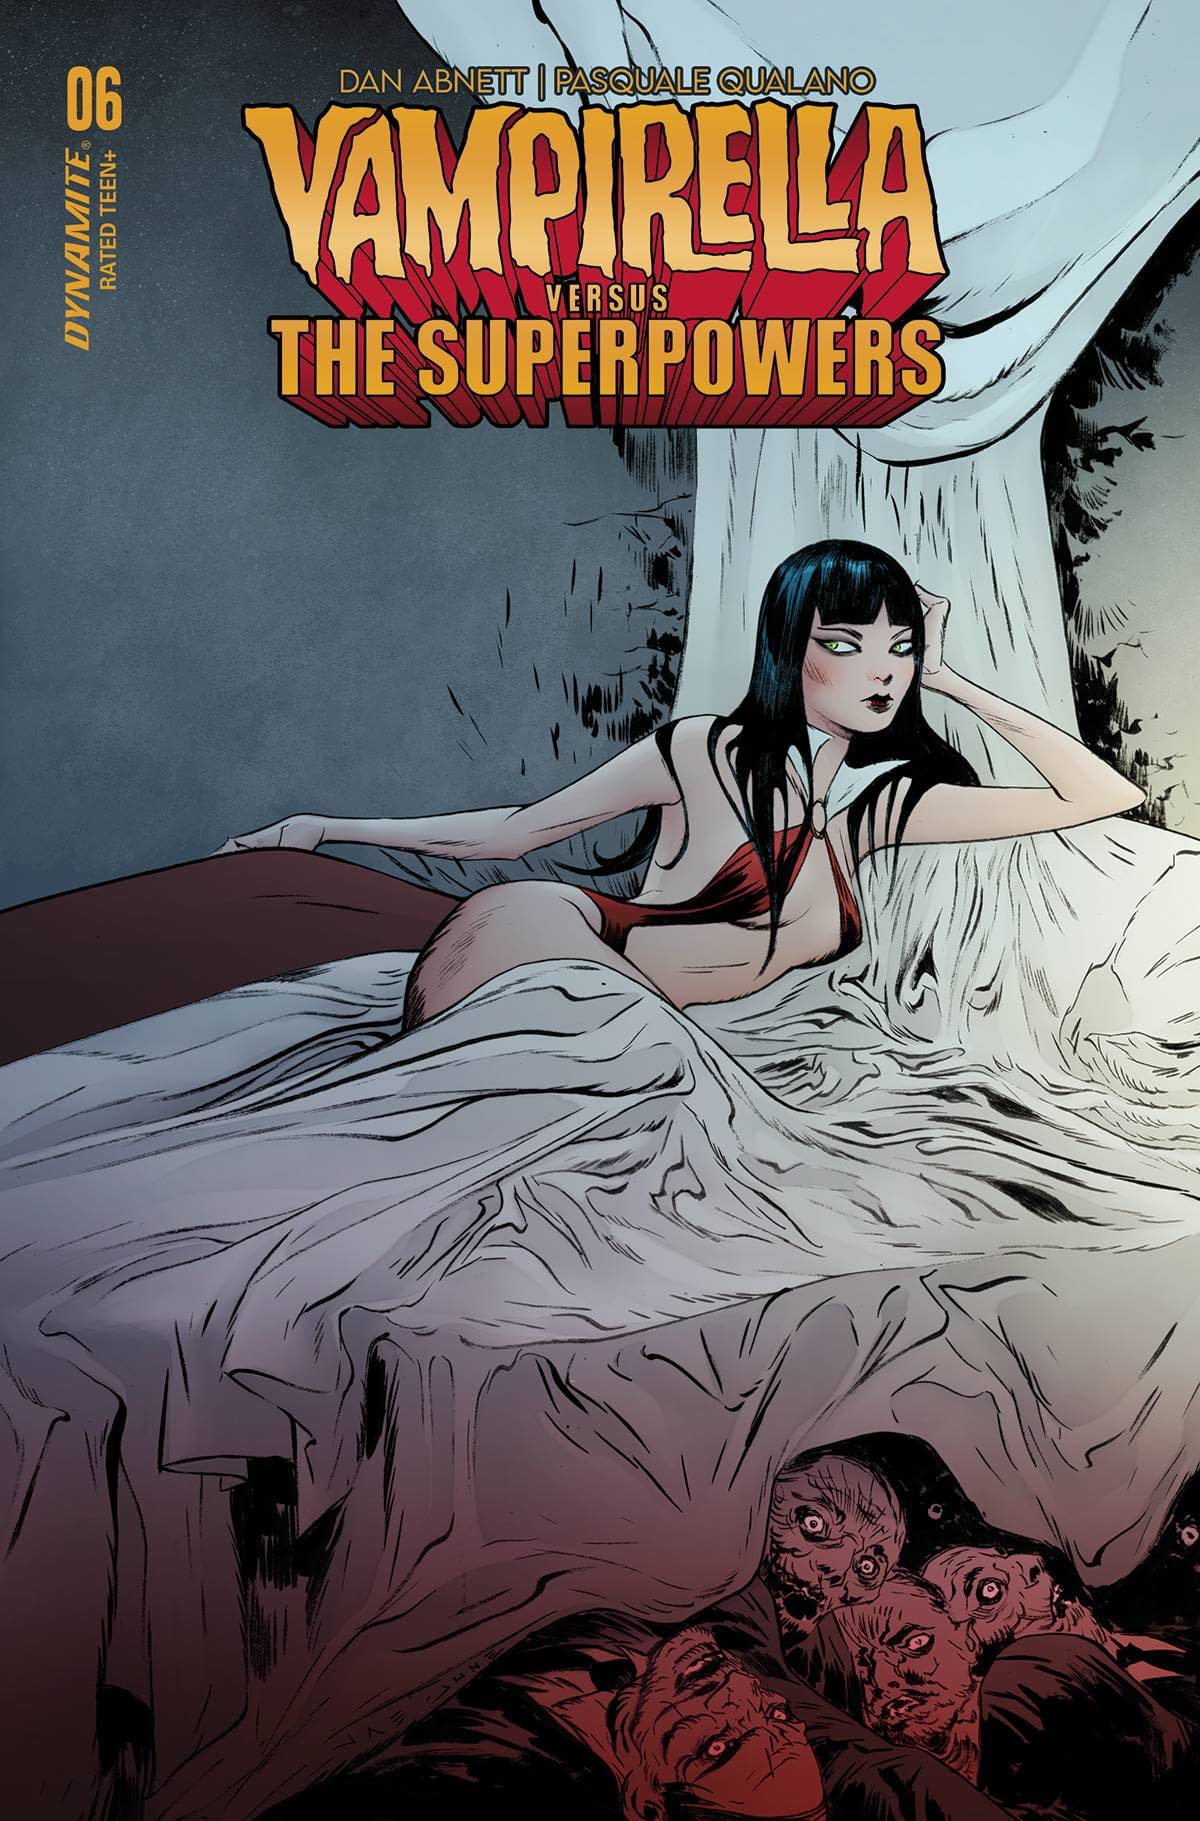 Cover image for Vampirella vs. The Superpowers #6